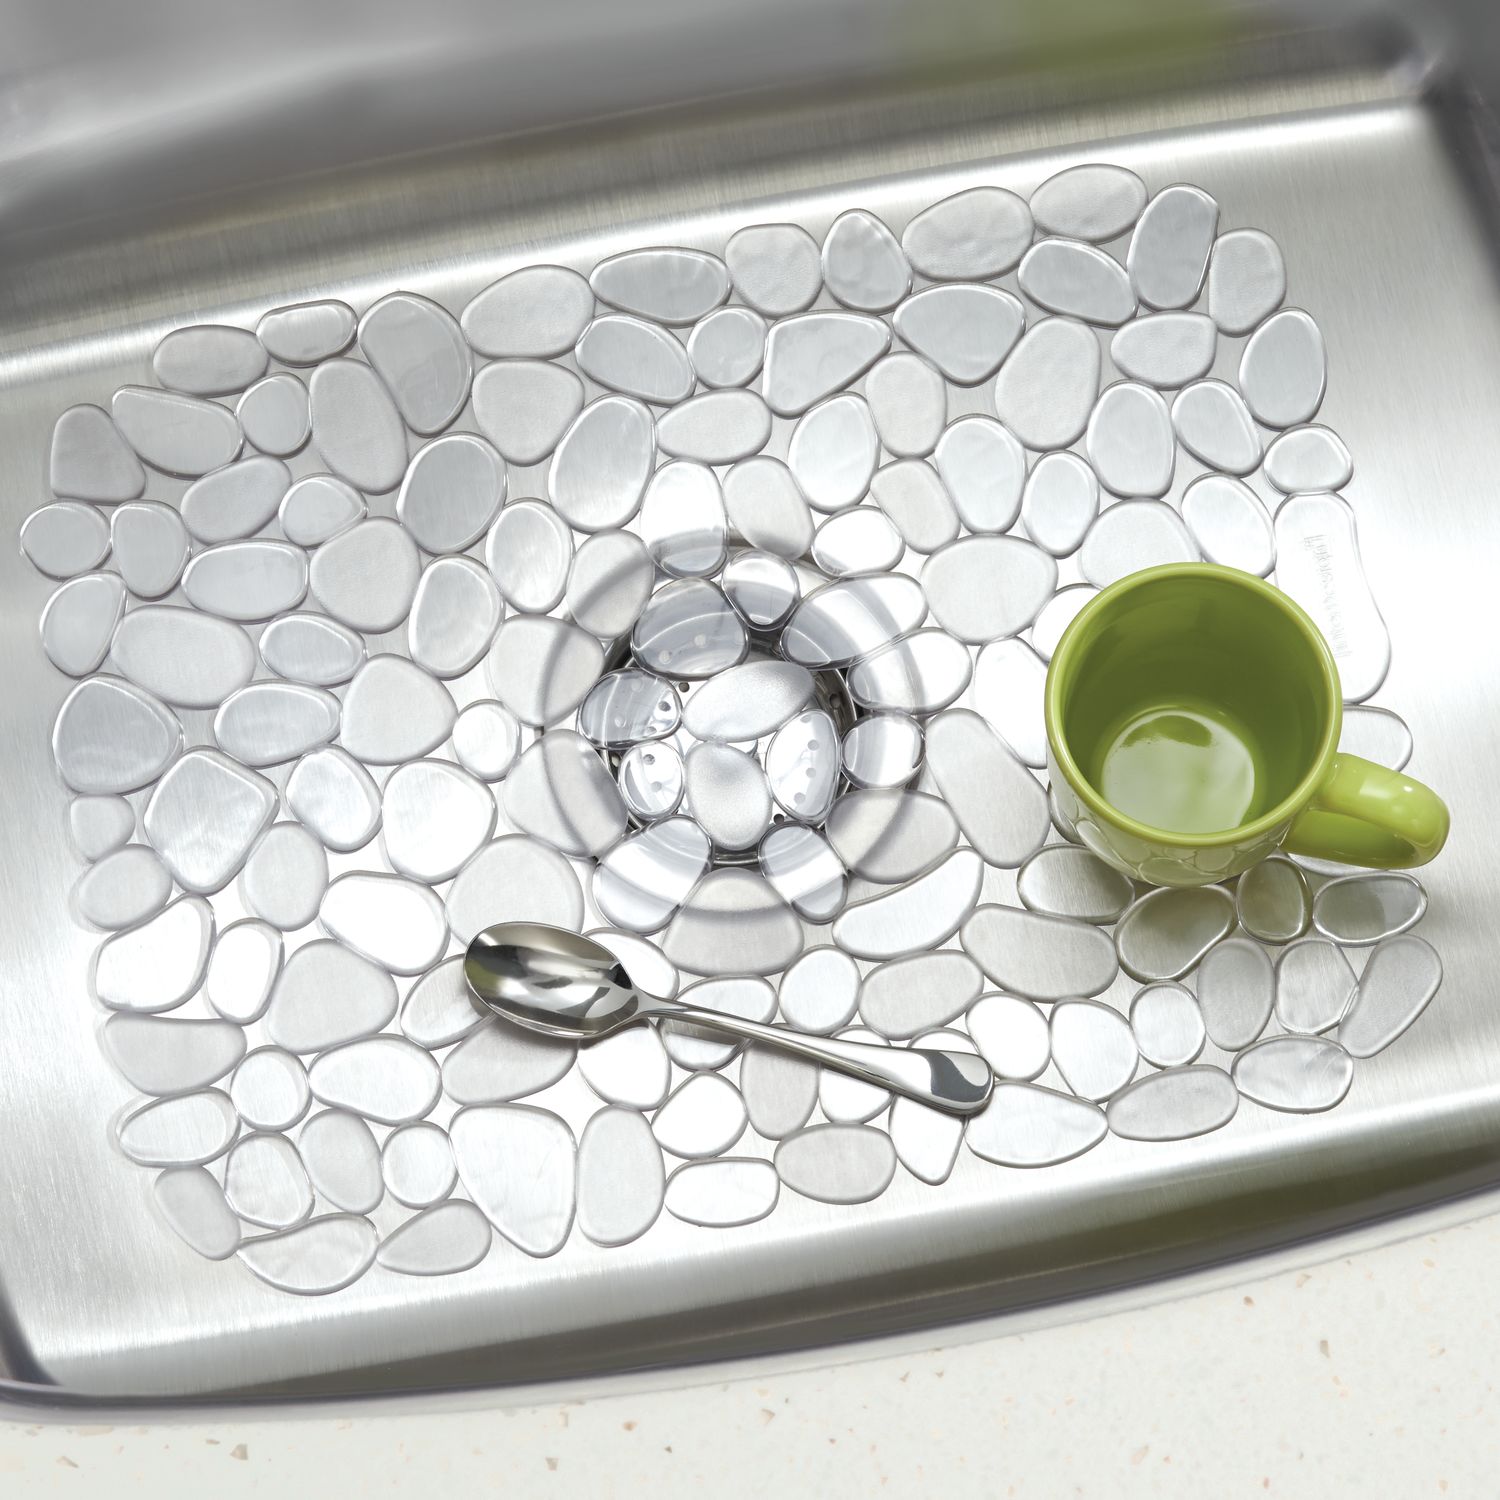 iDesign Pebblz 12" x 15.5" Large Sink Mat, Clear - image 4 of 7